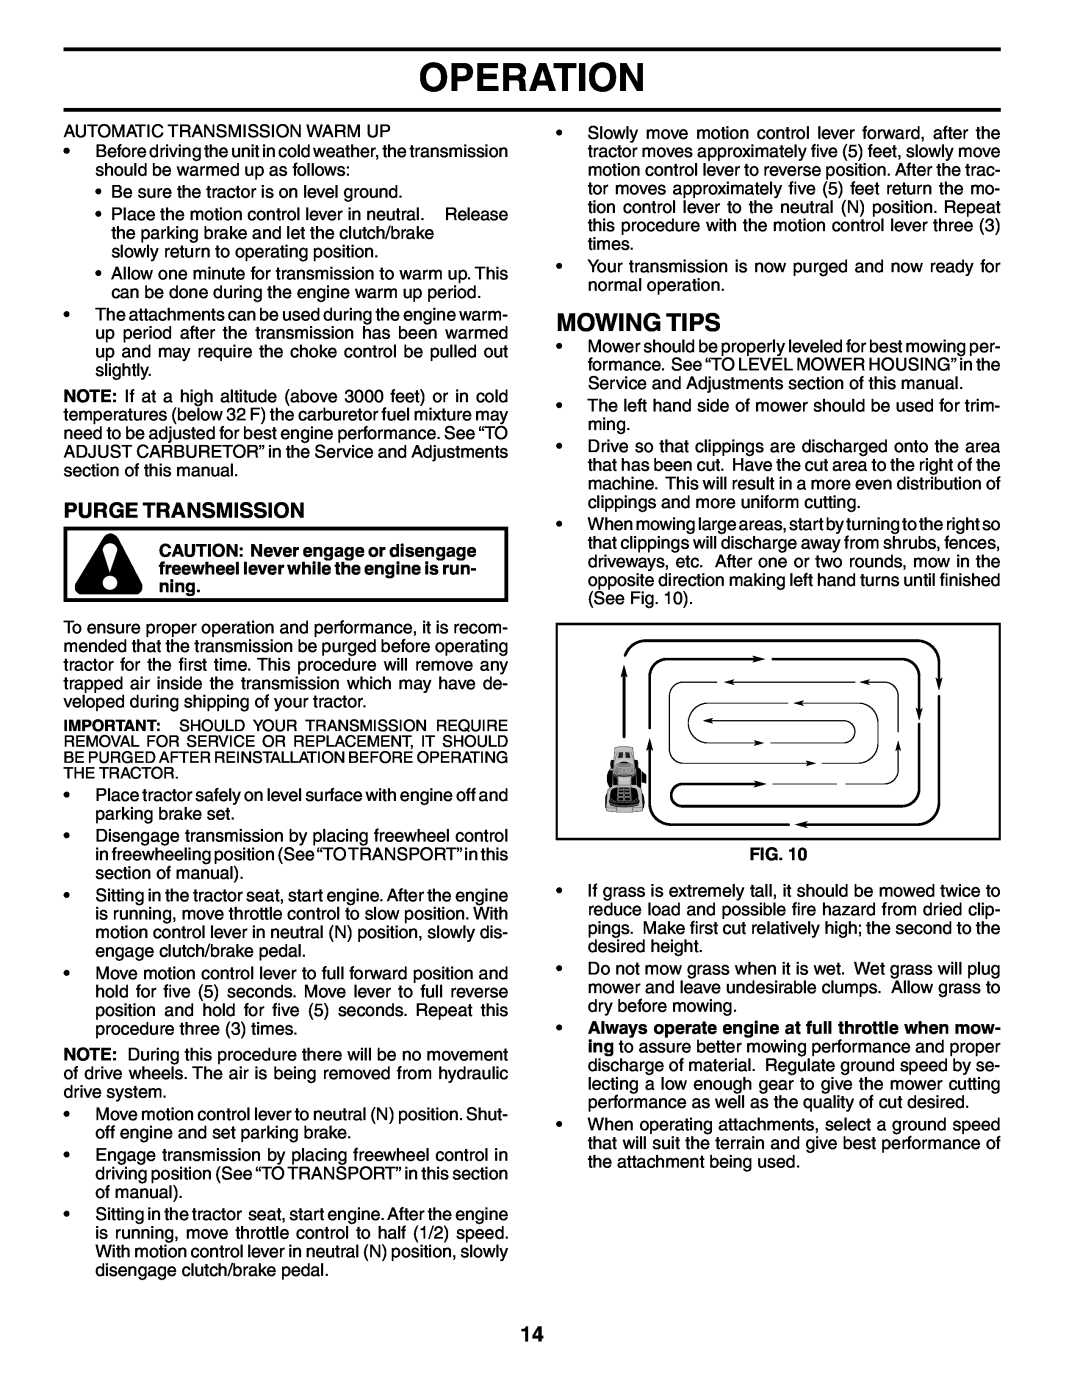 Poulan PD20H42STA owner manual Mowing Tips, Purge Transmission, Operation 